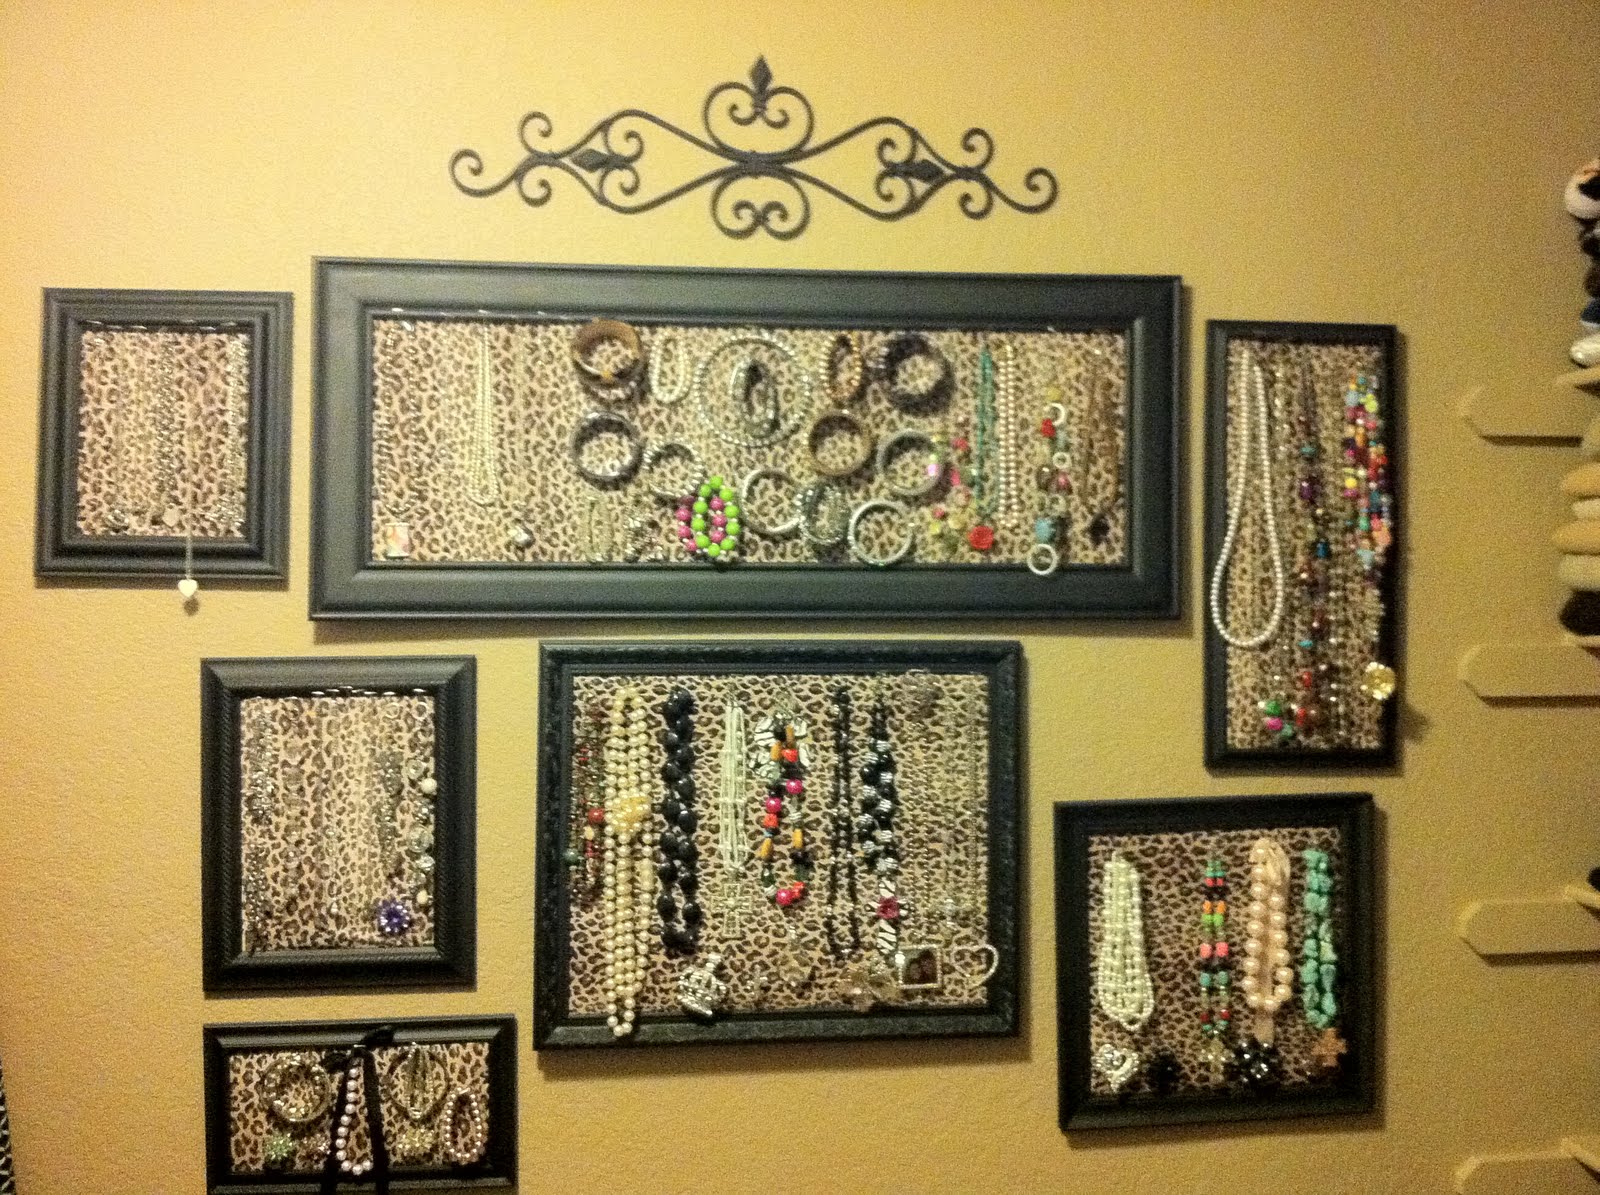 Frame on the wall and organize your jewelry.